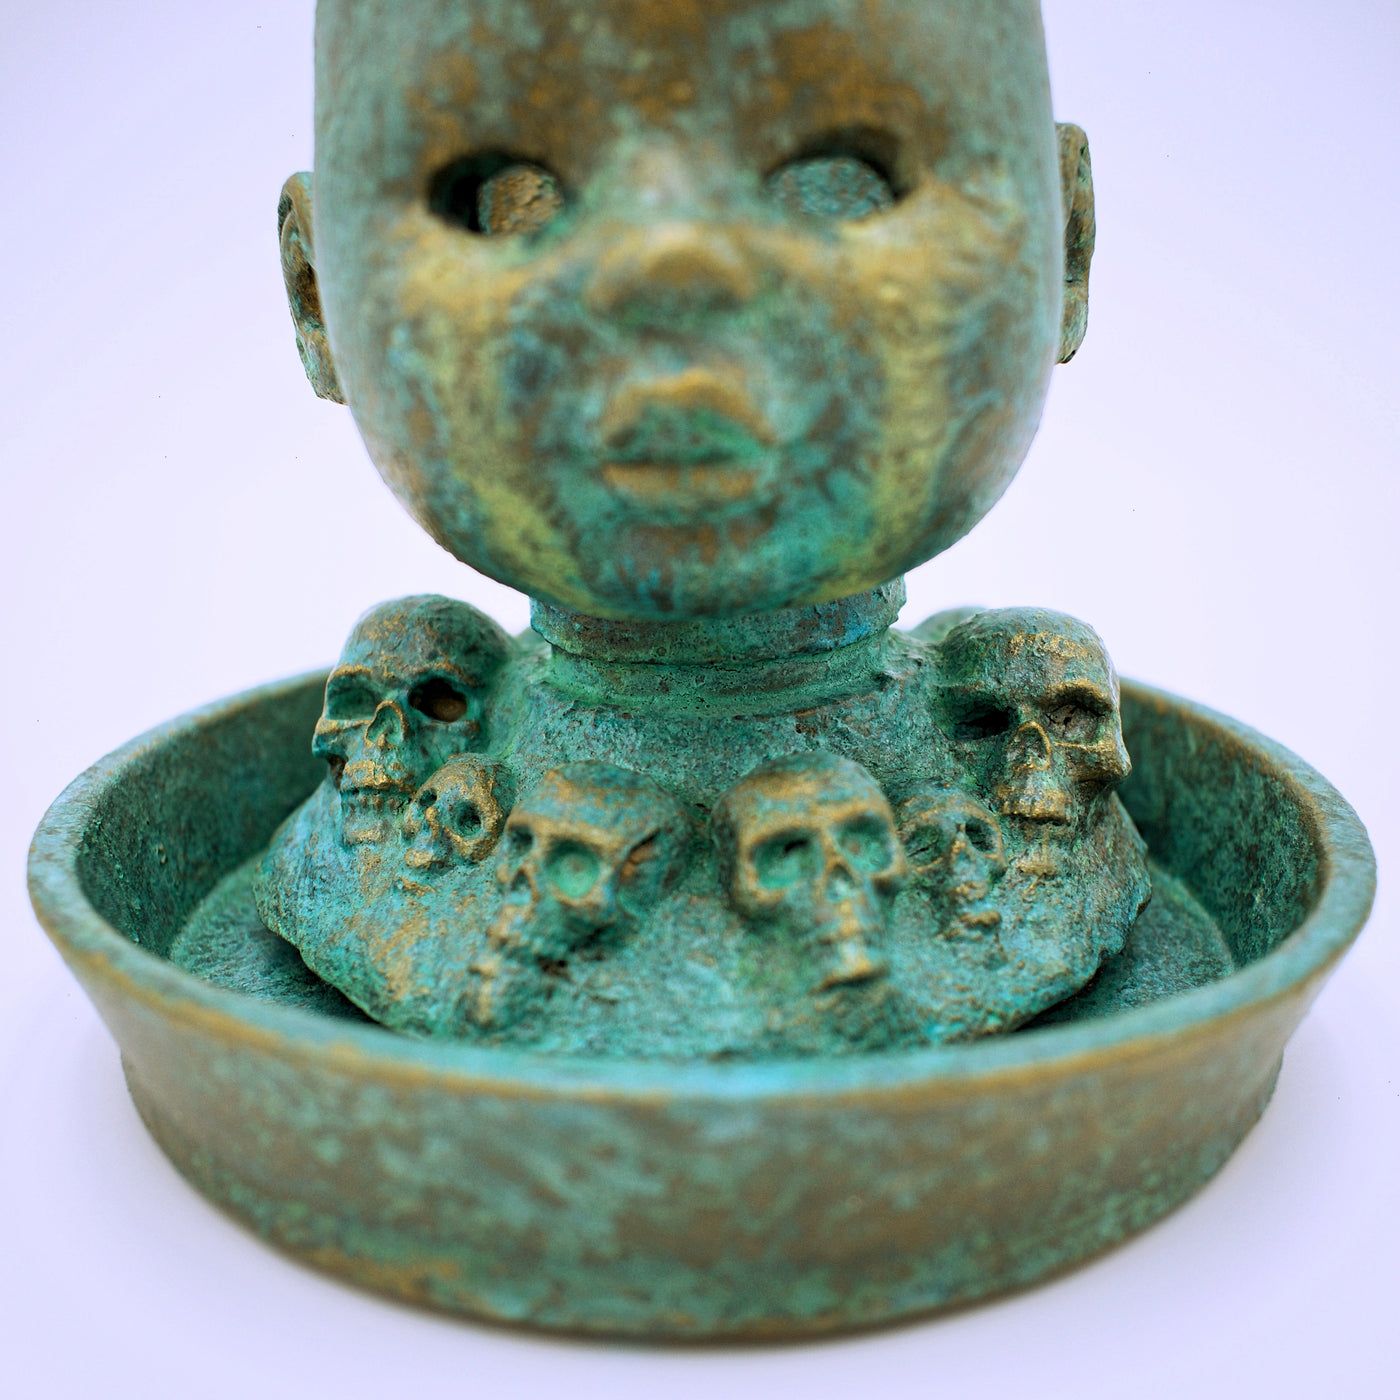 Baby Doll Head With Skulls Planter and Saucer - The Cranio Collections